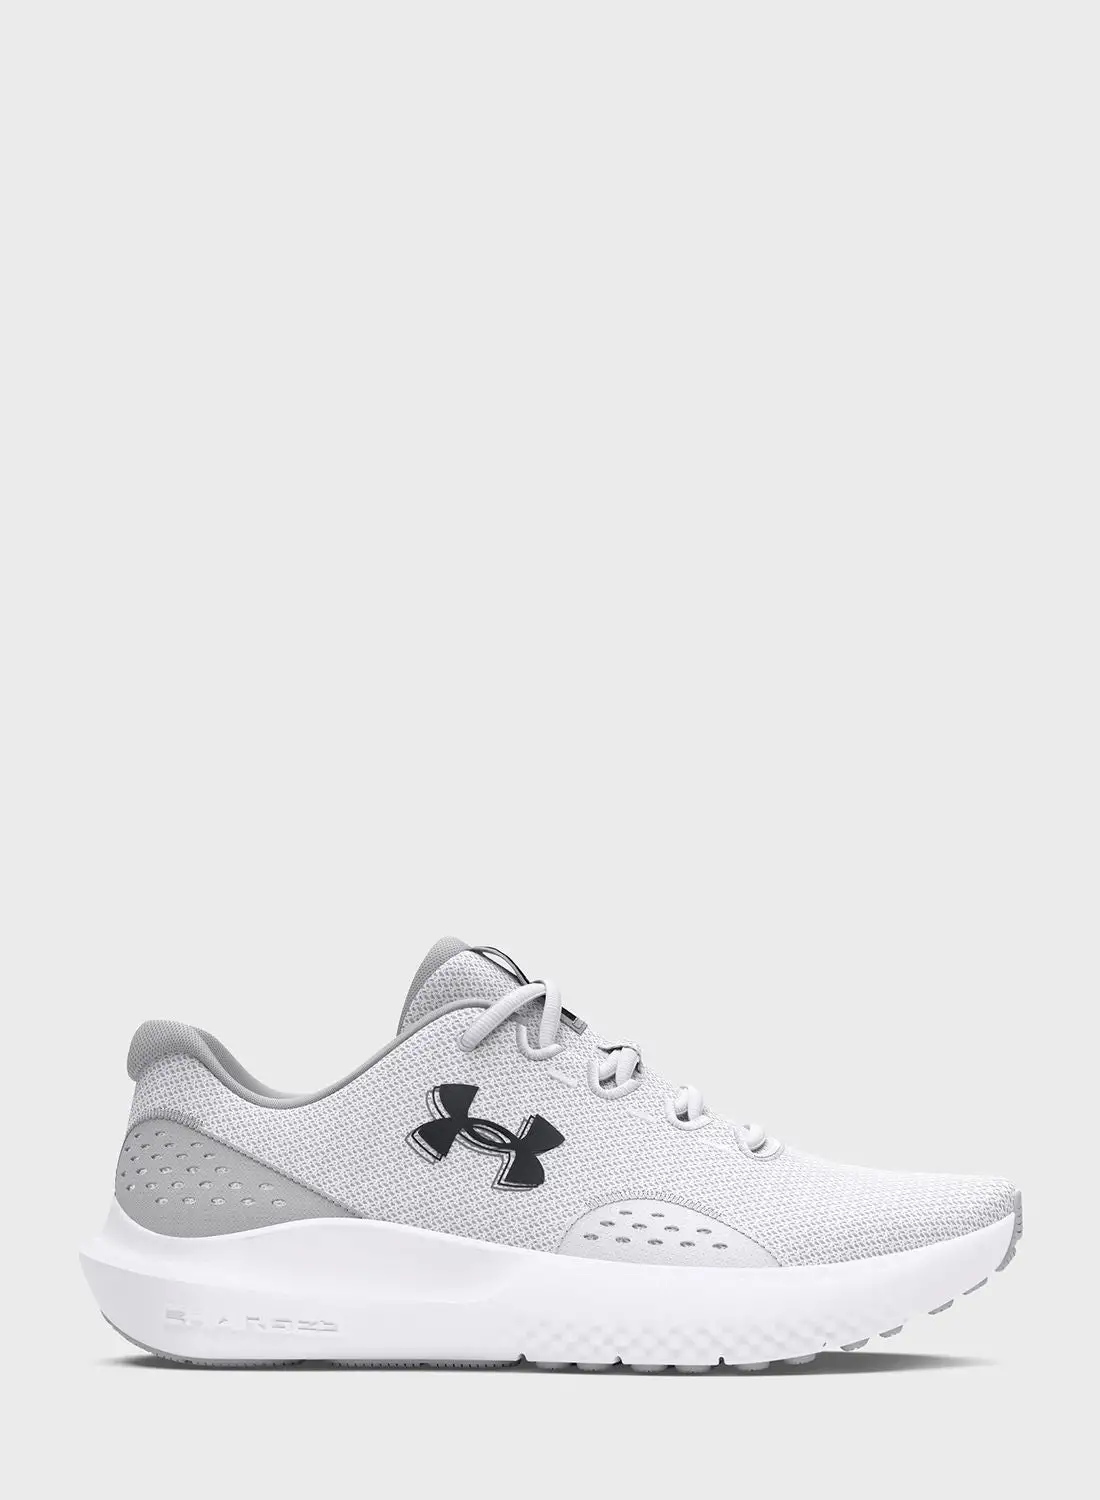 UNDER ARMOUR Charged Surge 4 Running Shoes